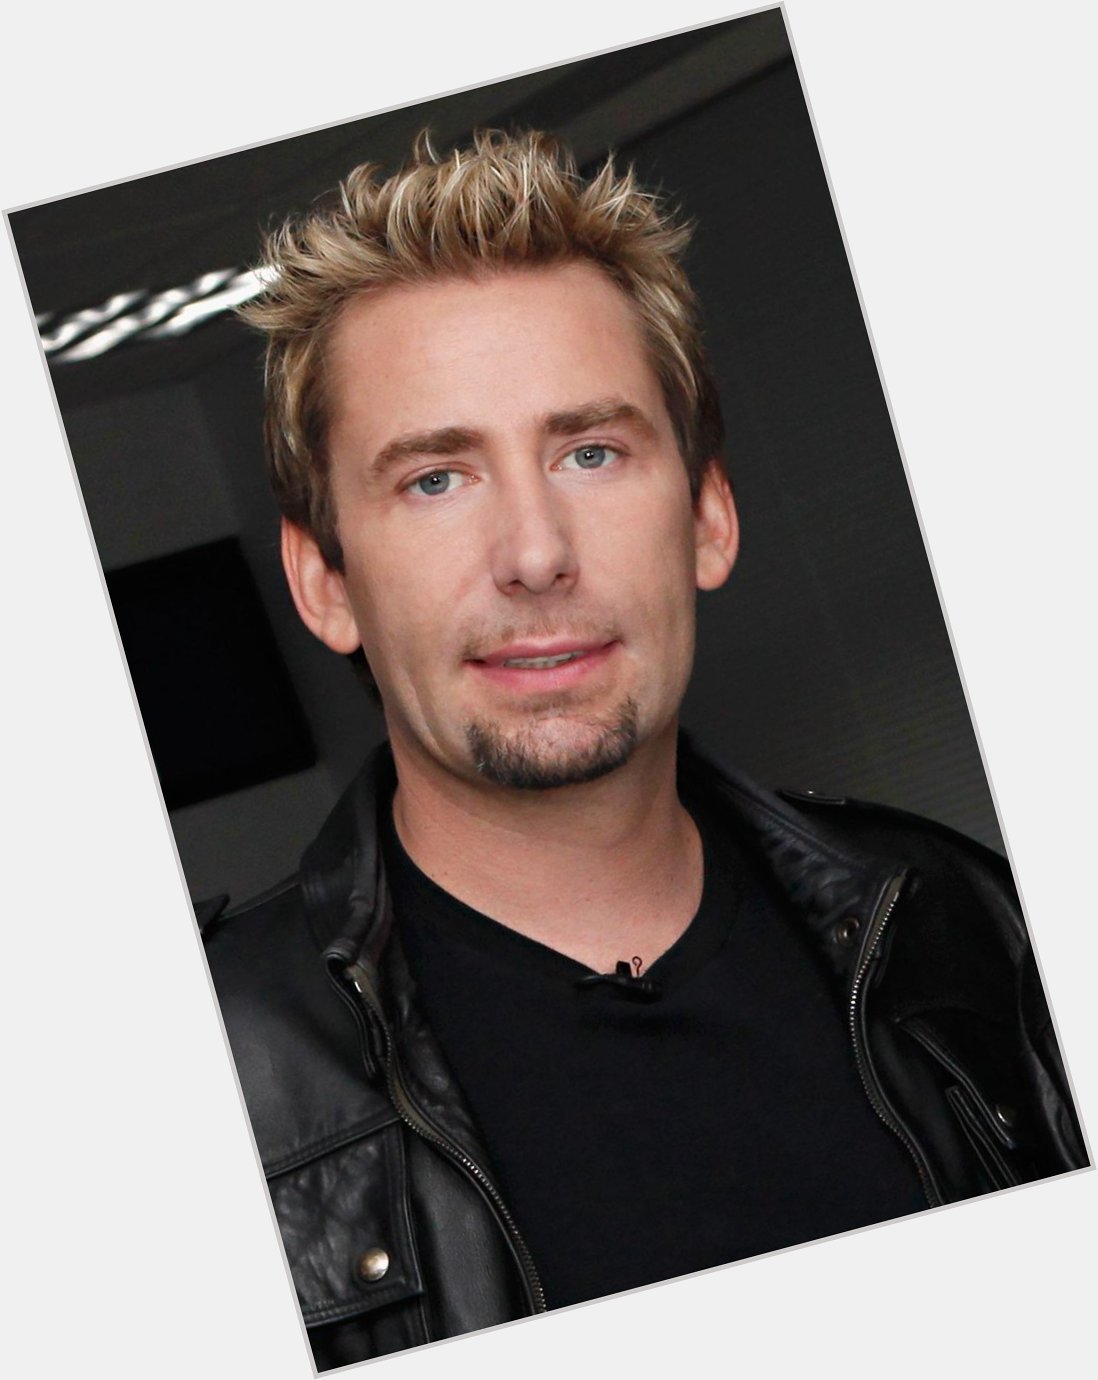 Happy Birthday to Chad Kroeger, who turns 40 today! 